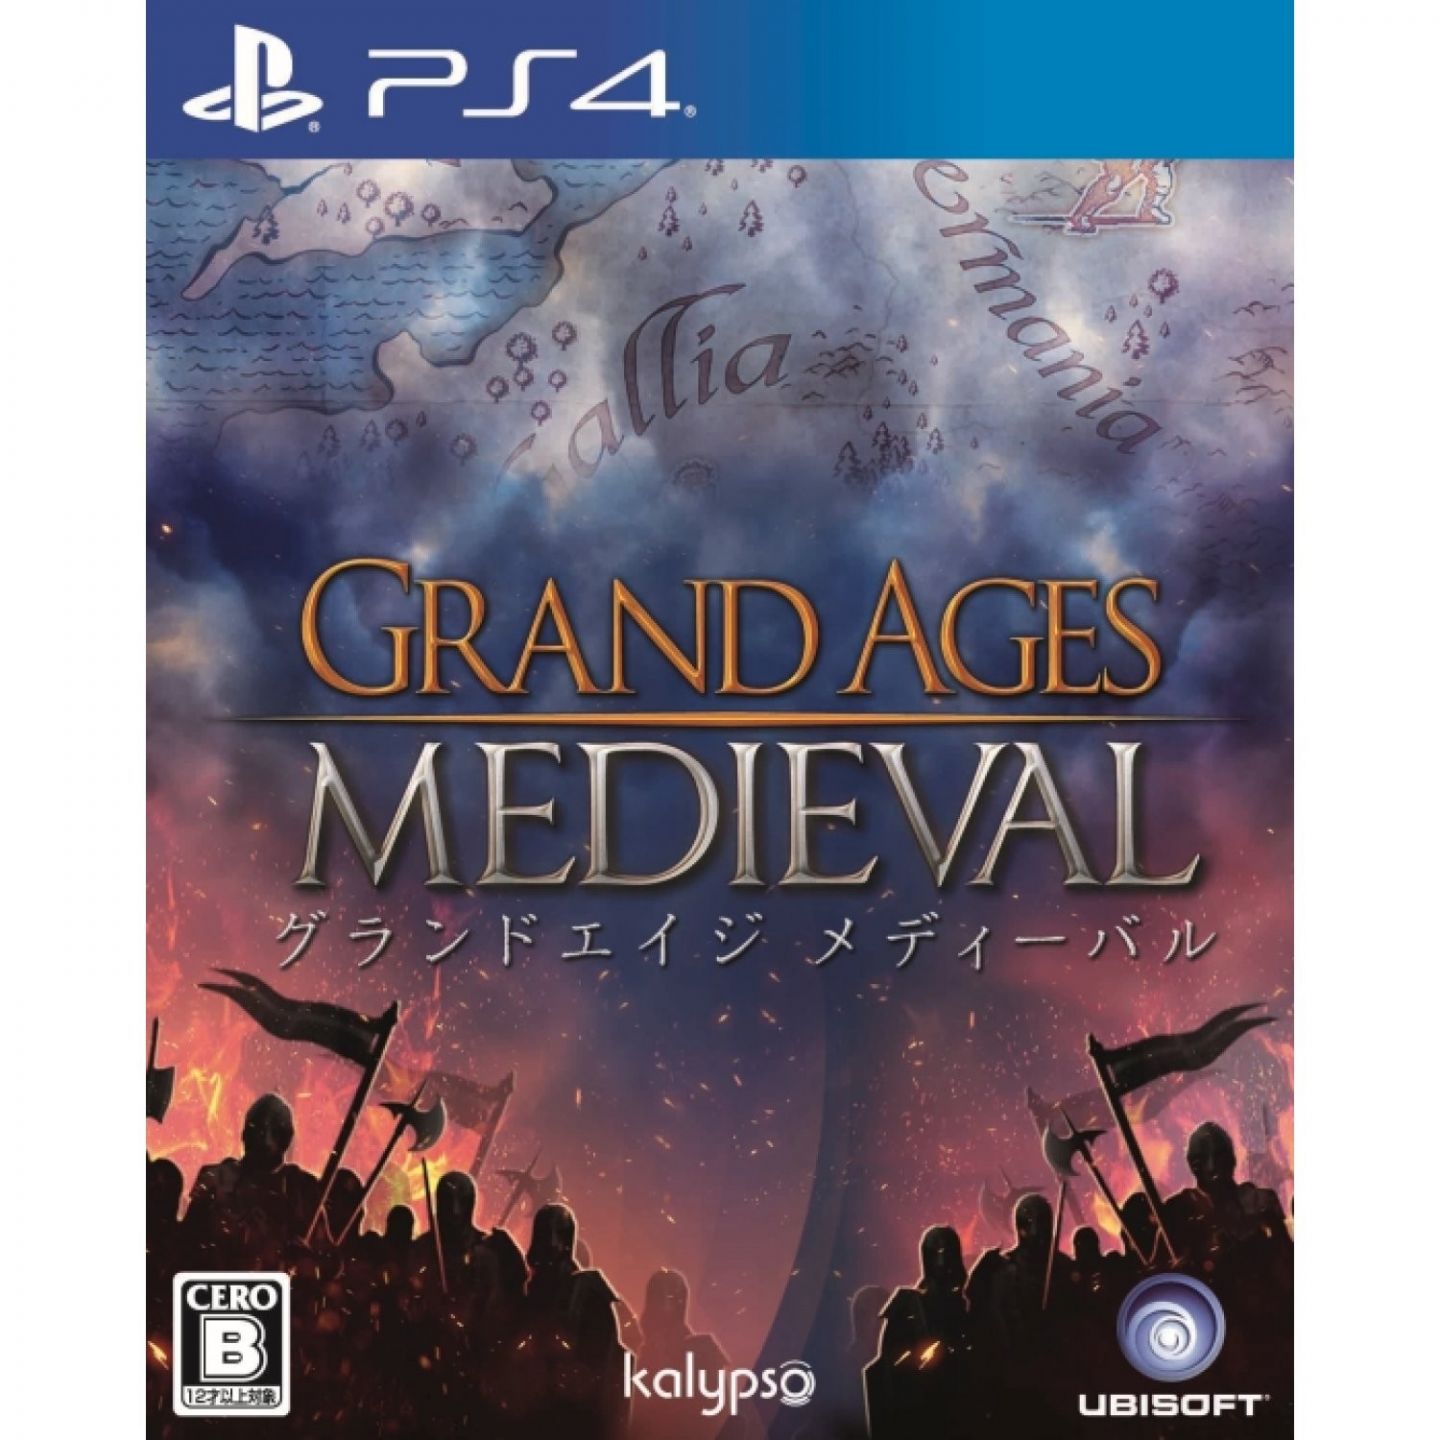 Grand ages Medieval ps4. Grand ages: Medieval. Grand ages. Medieval ps4